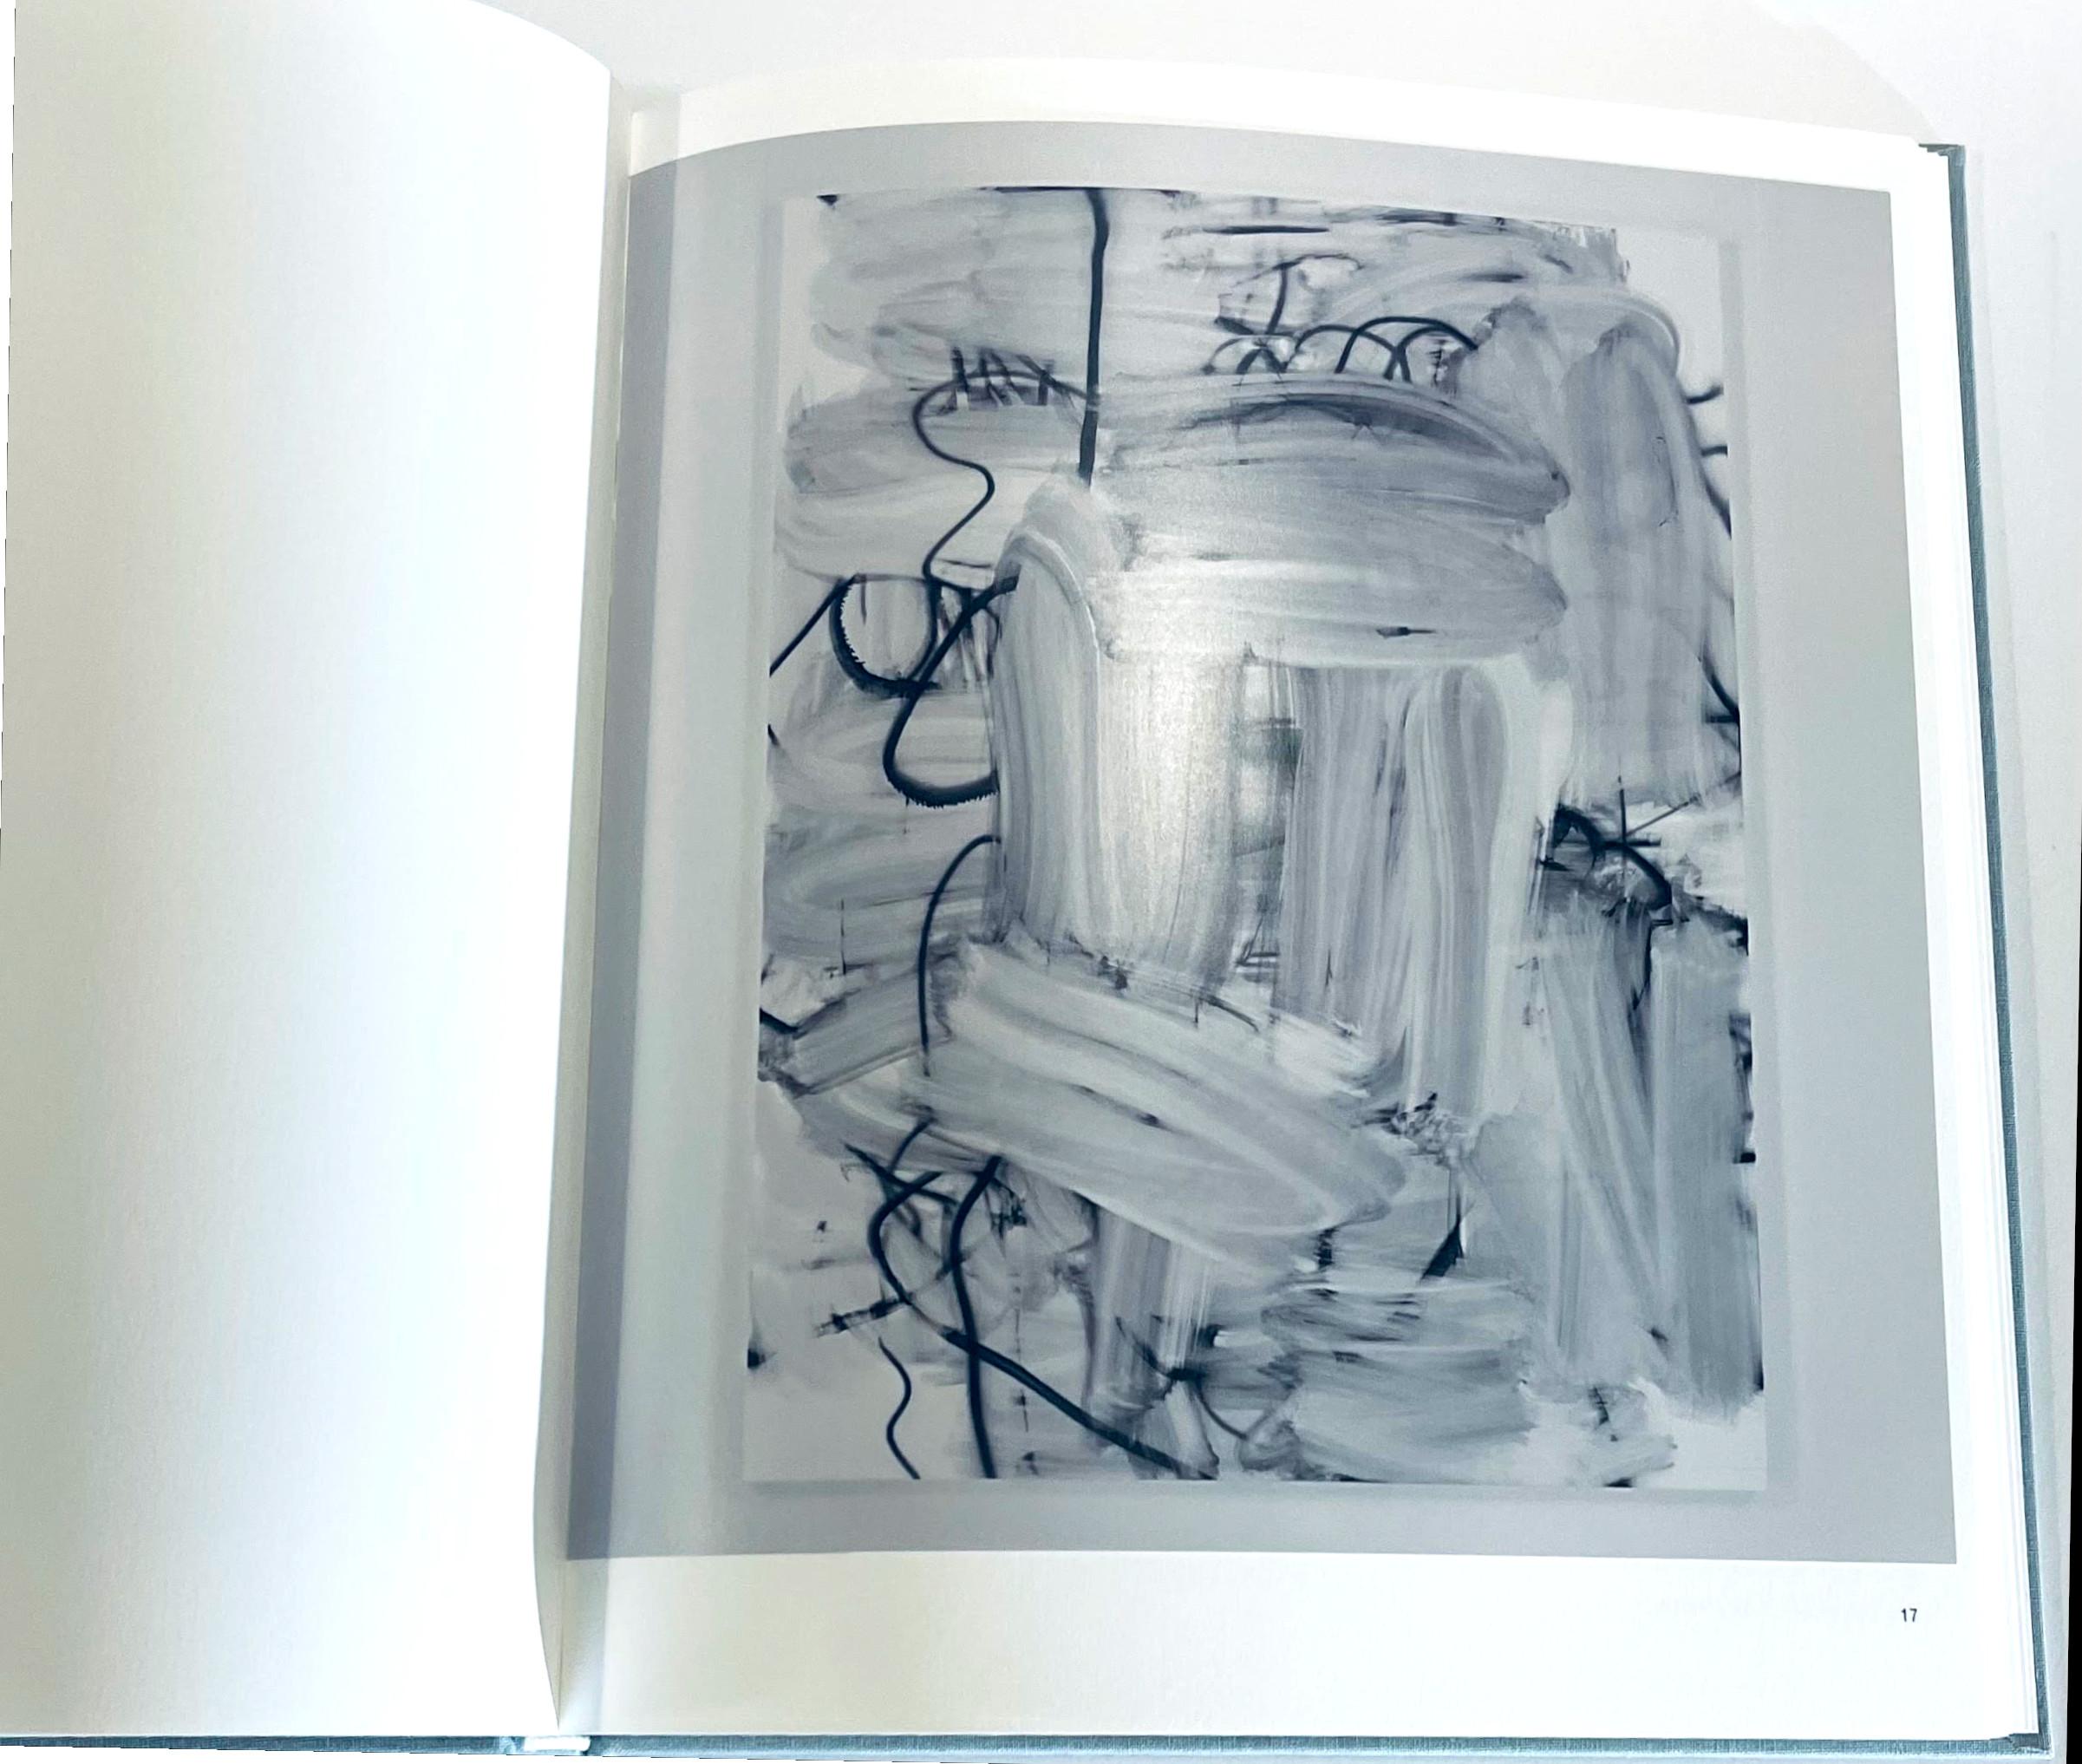 Gagosian Gallery hardback monograph (hand signed by Christopher Wool) For Sale 7